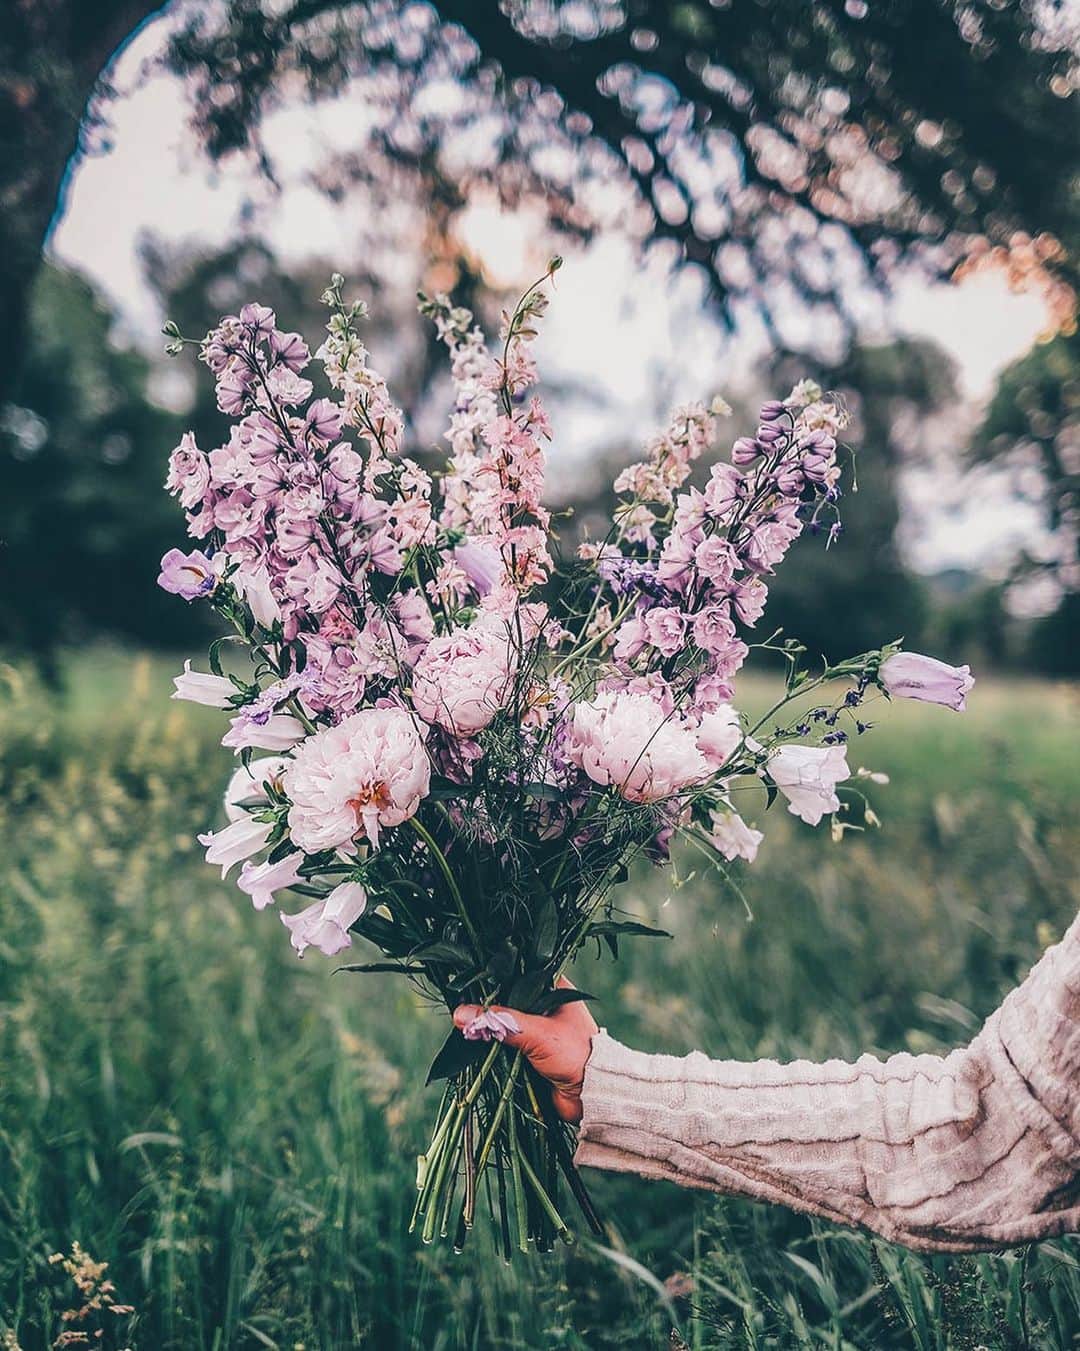 Our Food Storiesのインスタグラム：「A favorite flower bouquet 🌸🌿 Can‘t believe it’s almost September, so not ready to let summer go yet. #ourfoodstories_countryside  _____ #flowerbouquet #bouquetofflowers #bouquet #vscoflowers #stilllifephotography #flowerlovers #flowerlover #peony #peonyseason #summerflowers #blooooms #countrysidelife #countrysideliving #landlust #blumenliebe」